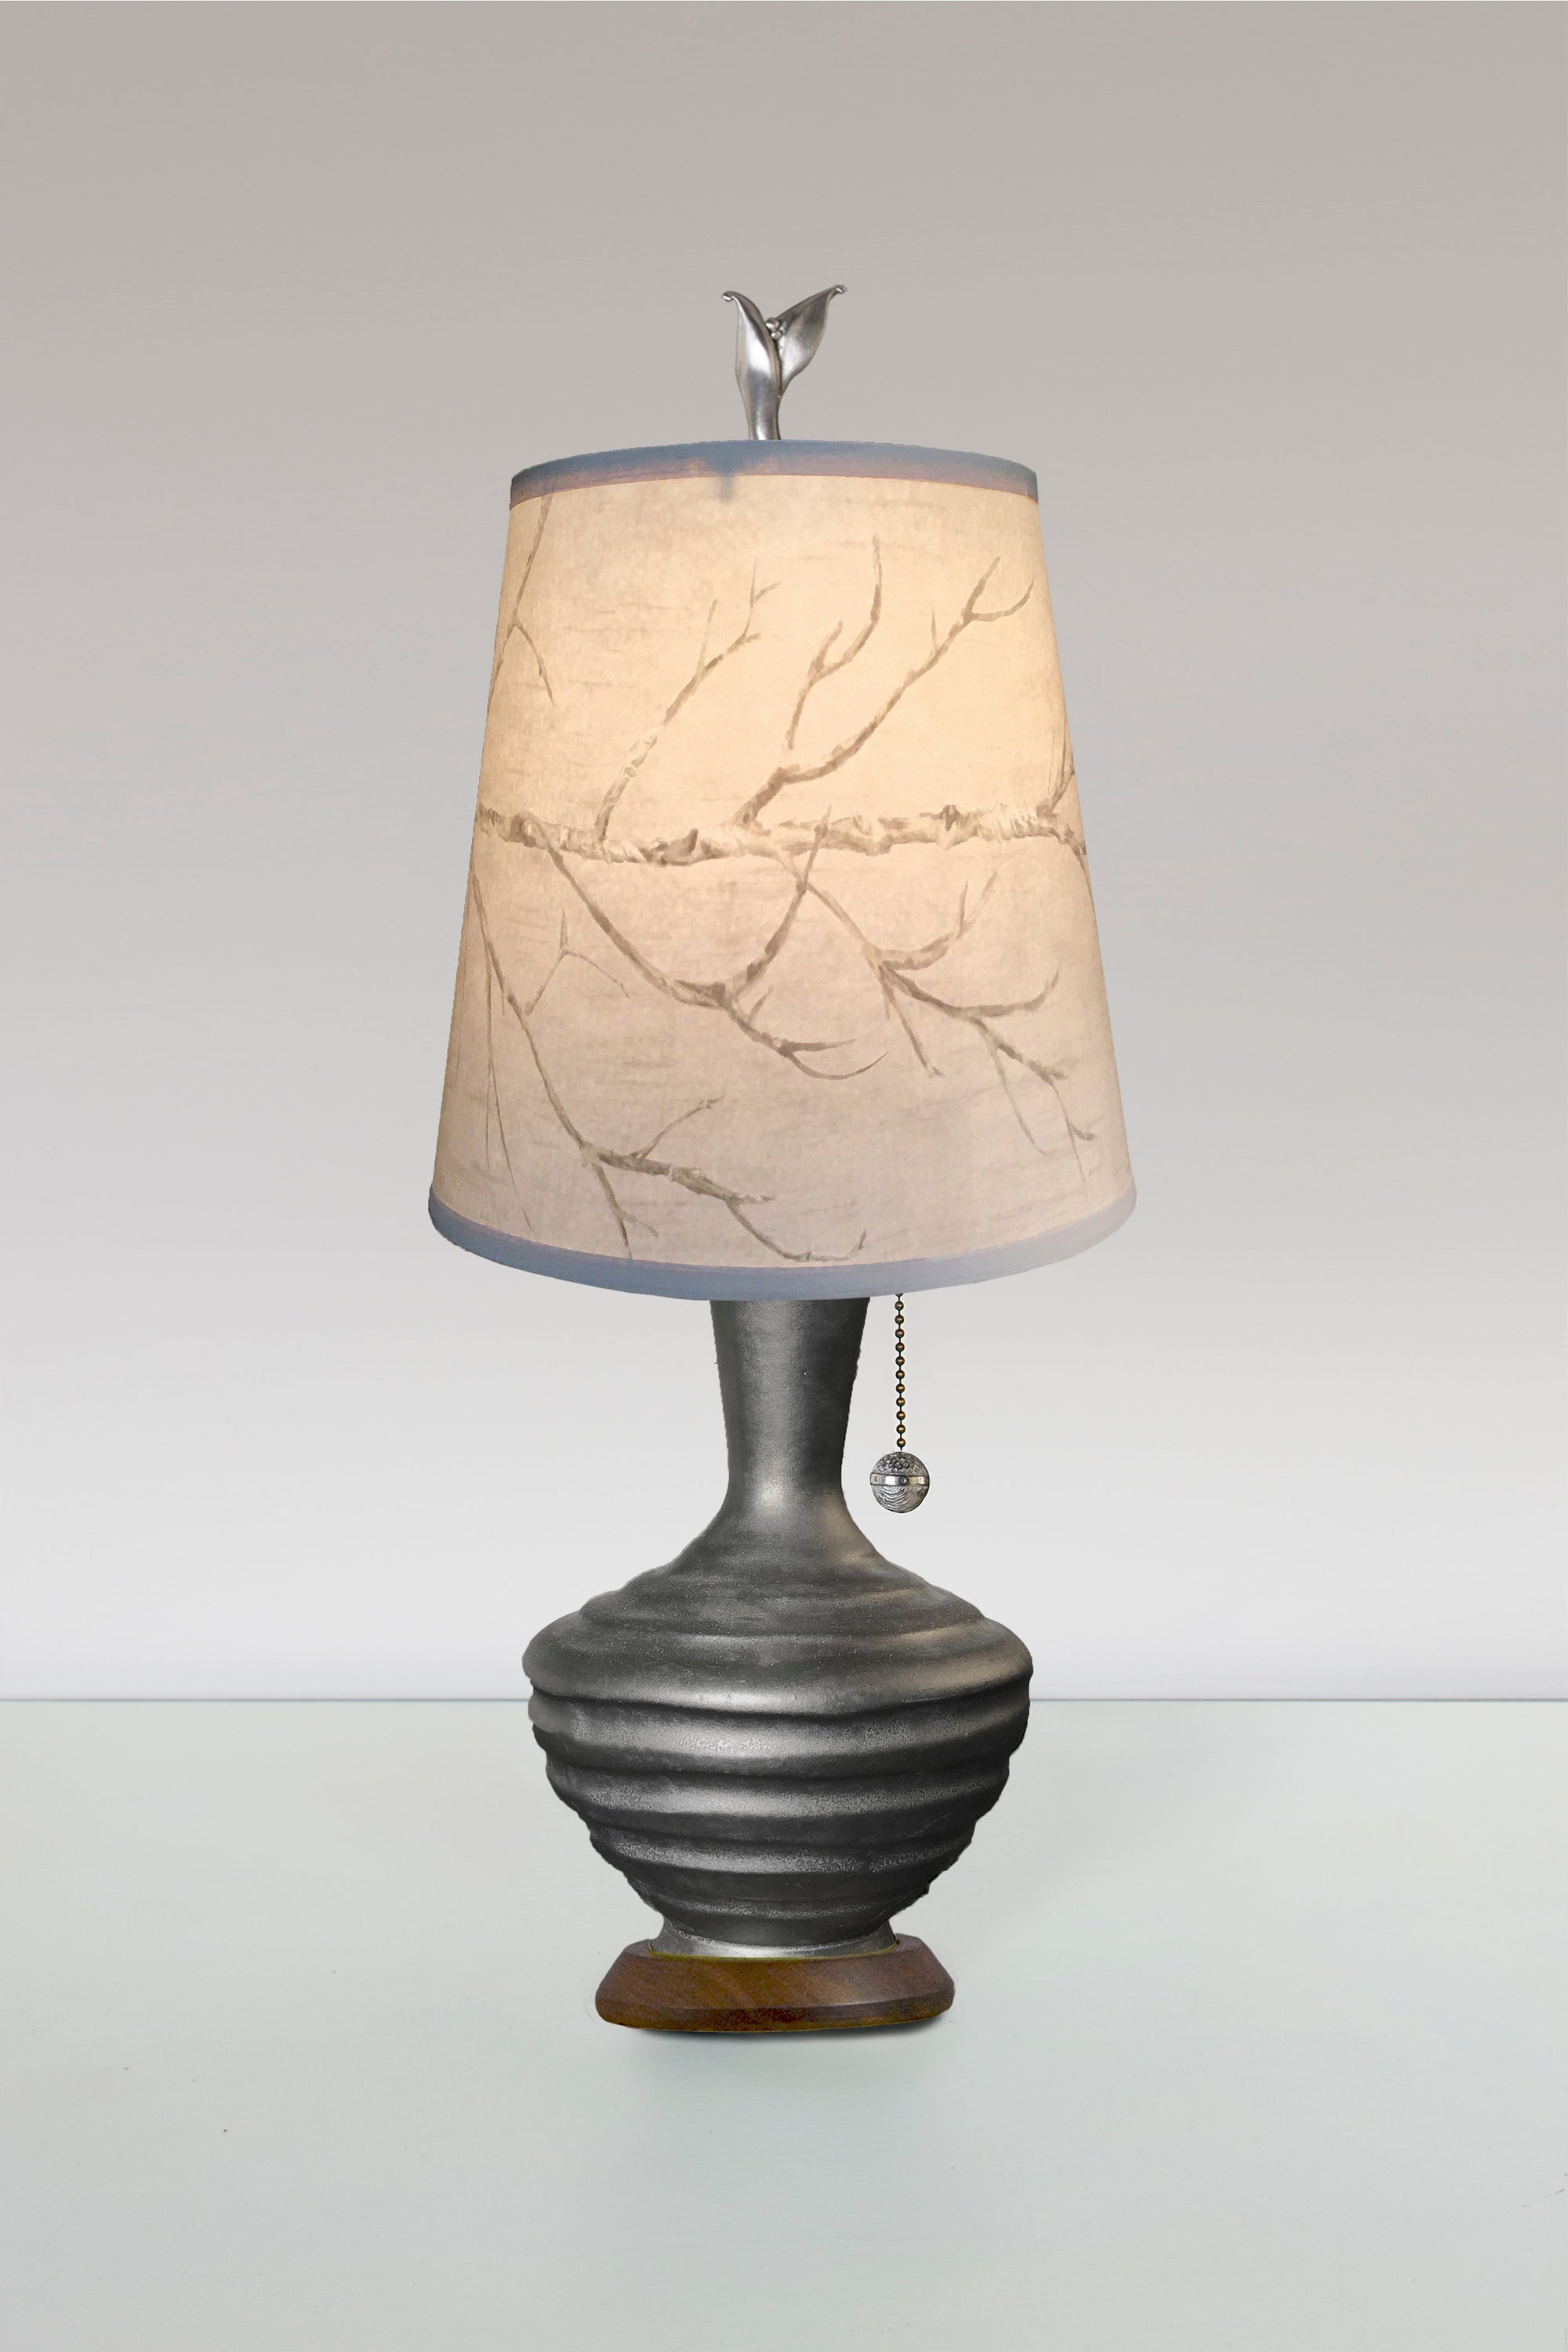 Janna Ugone & Co Table Lamps Ceramic Table Lamp with Small Drum Shade in Sweeping Branch